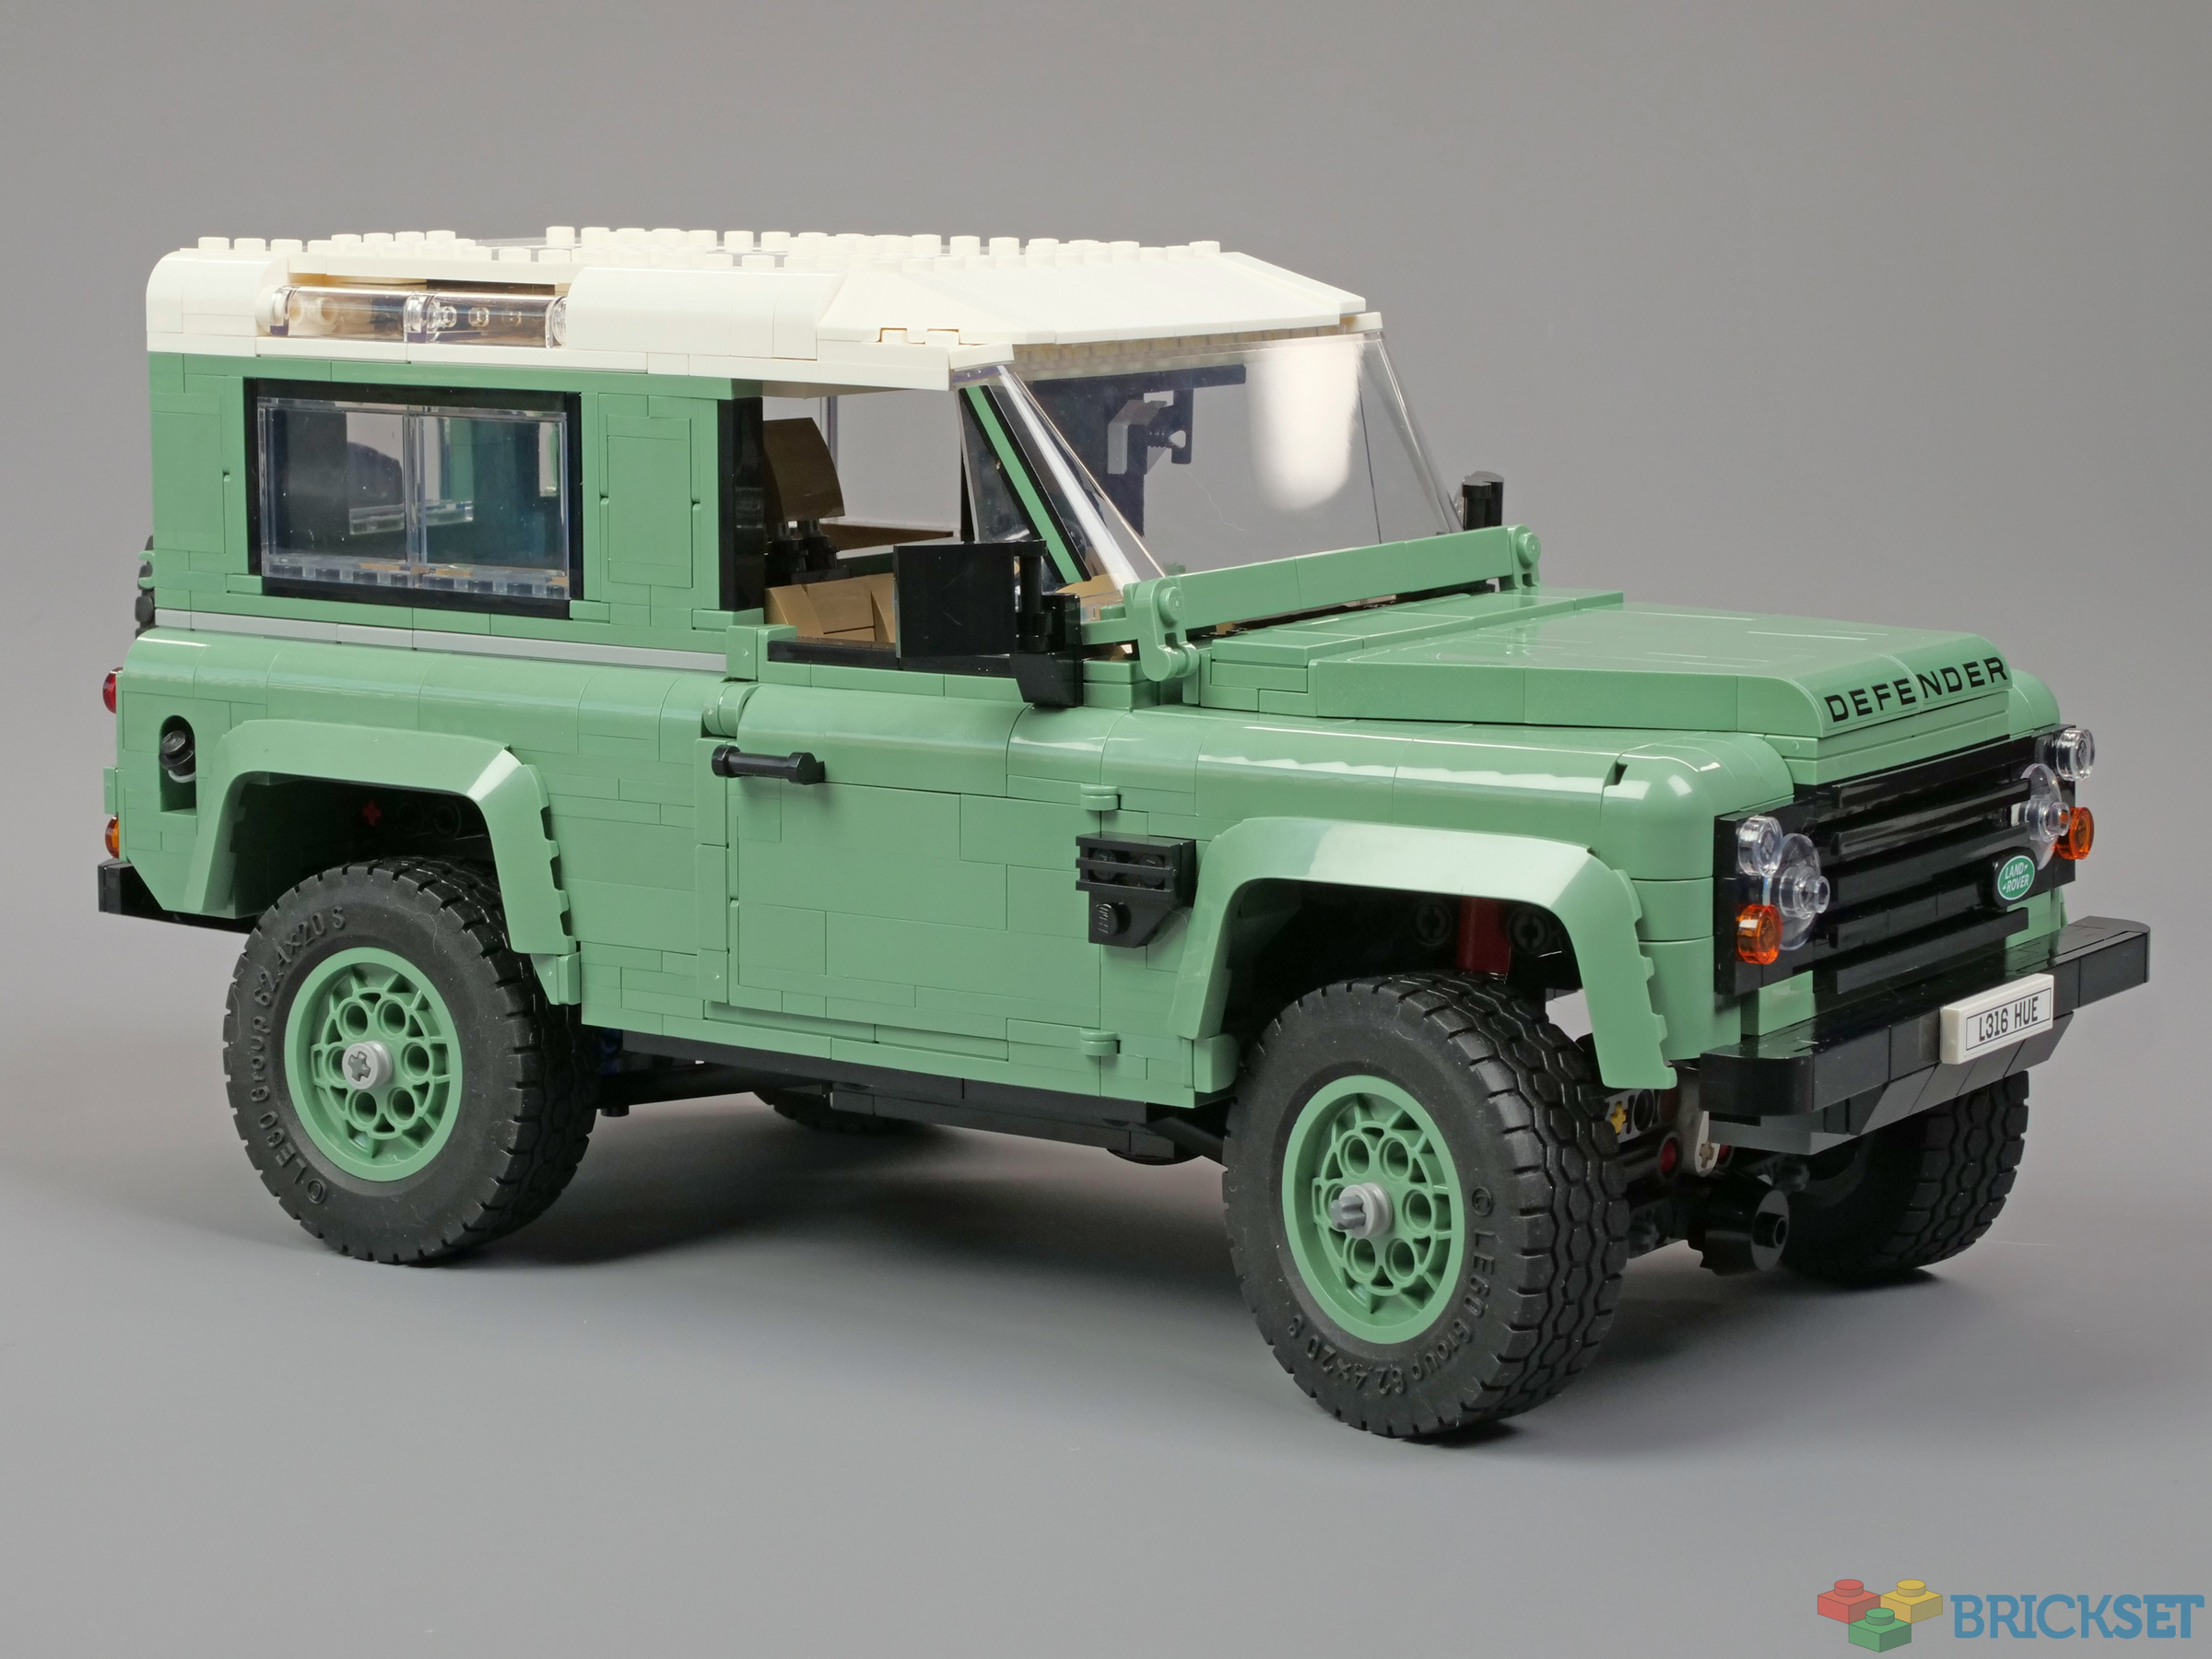 The classic Land Rover Defender 90 has been given the Lego treatment